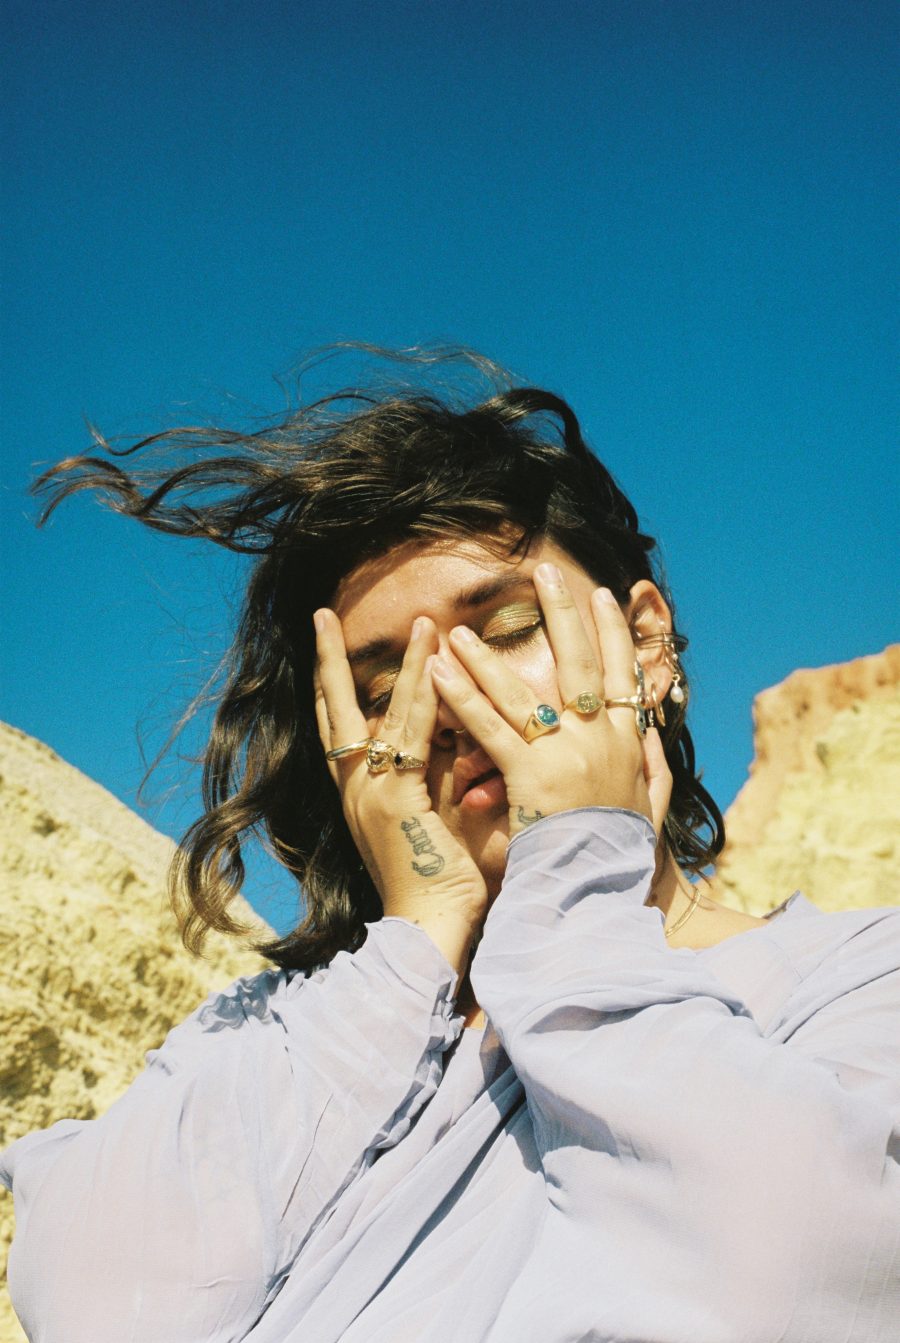 A person covering their face as their hair blows in the wind. Taken by Jade Florence.